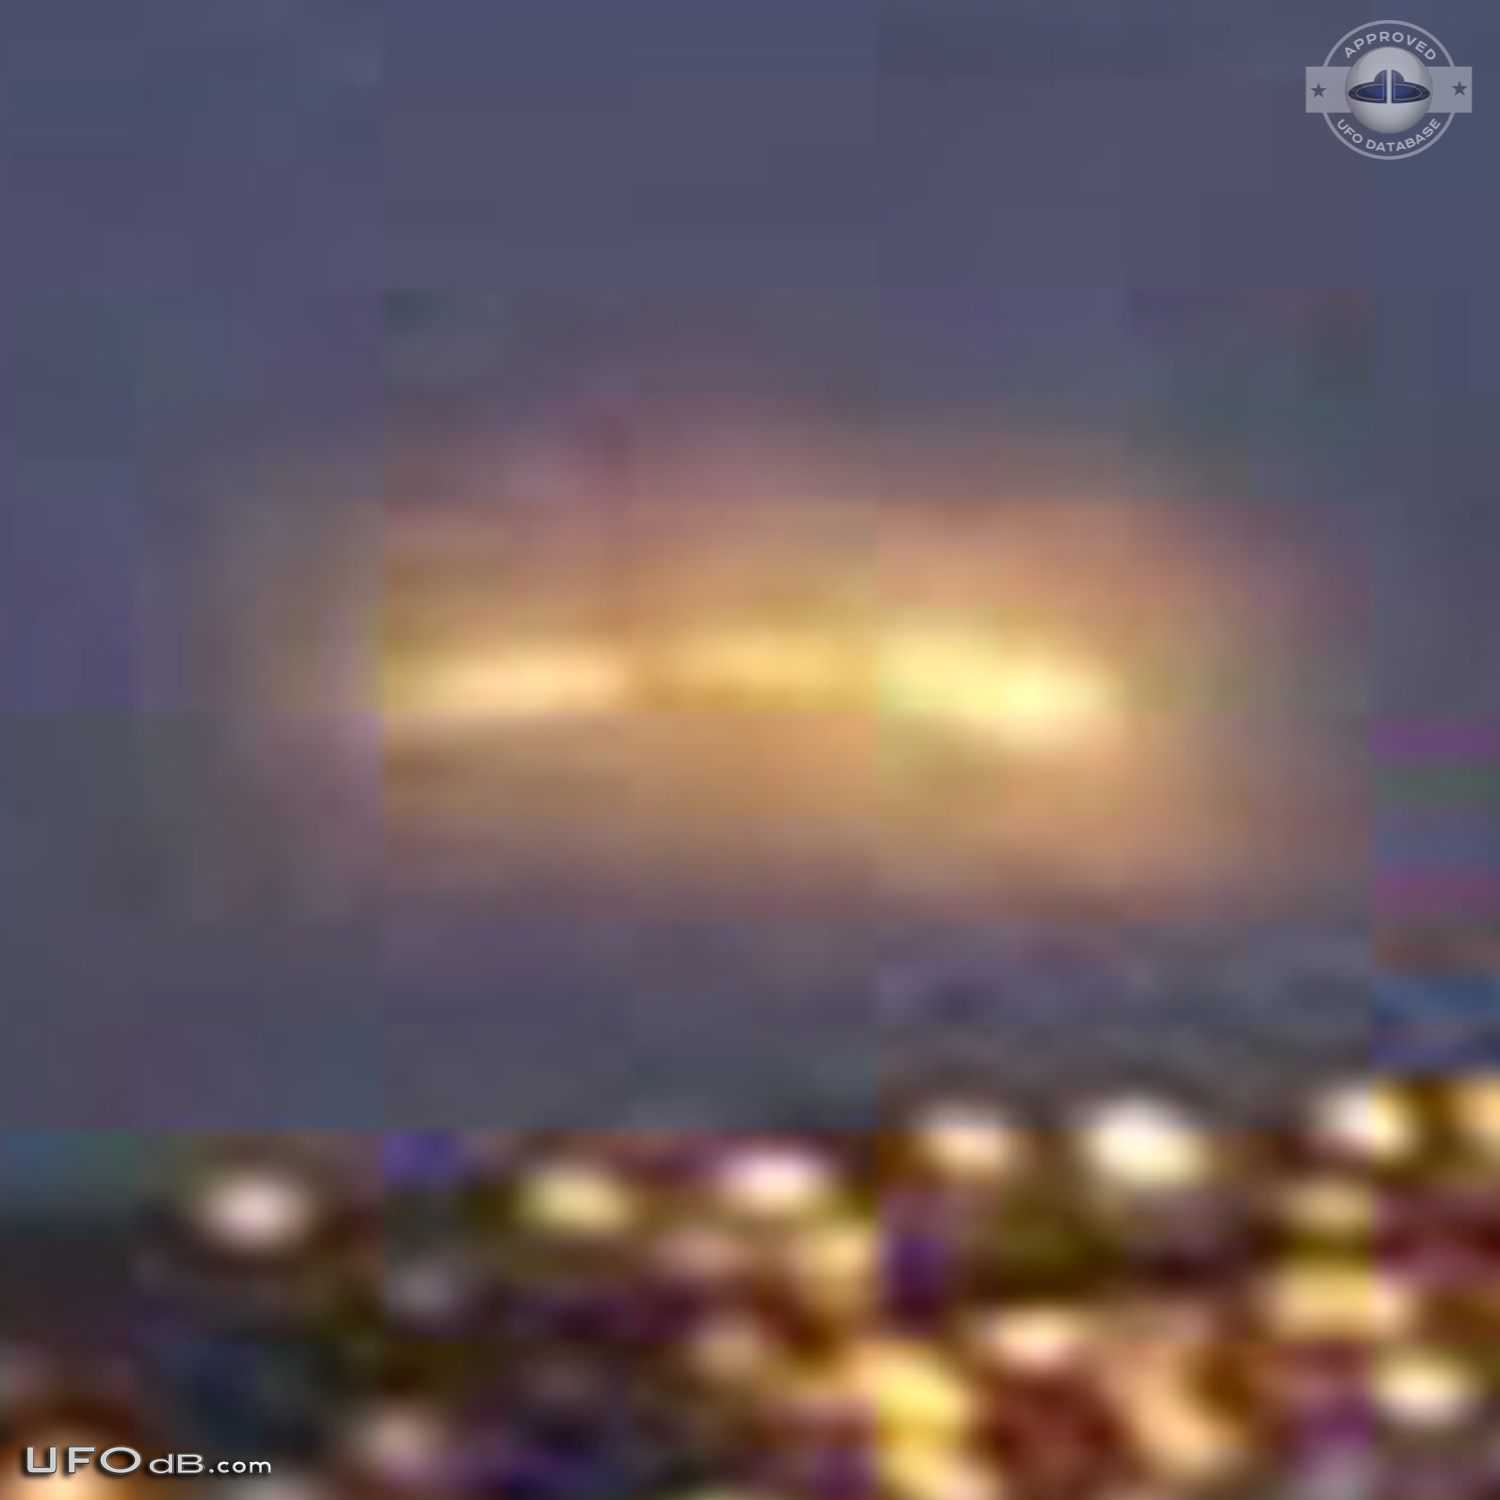 UFO saucer caught on picture by journalist in Mexico - October 2014 UFO Picture #639-6